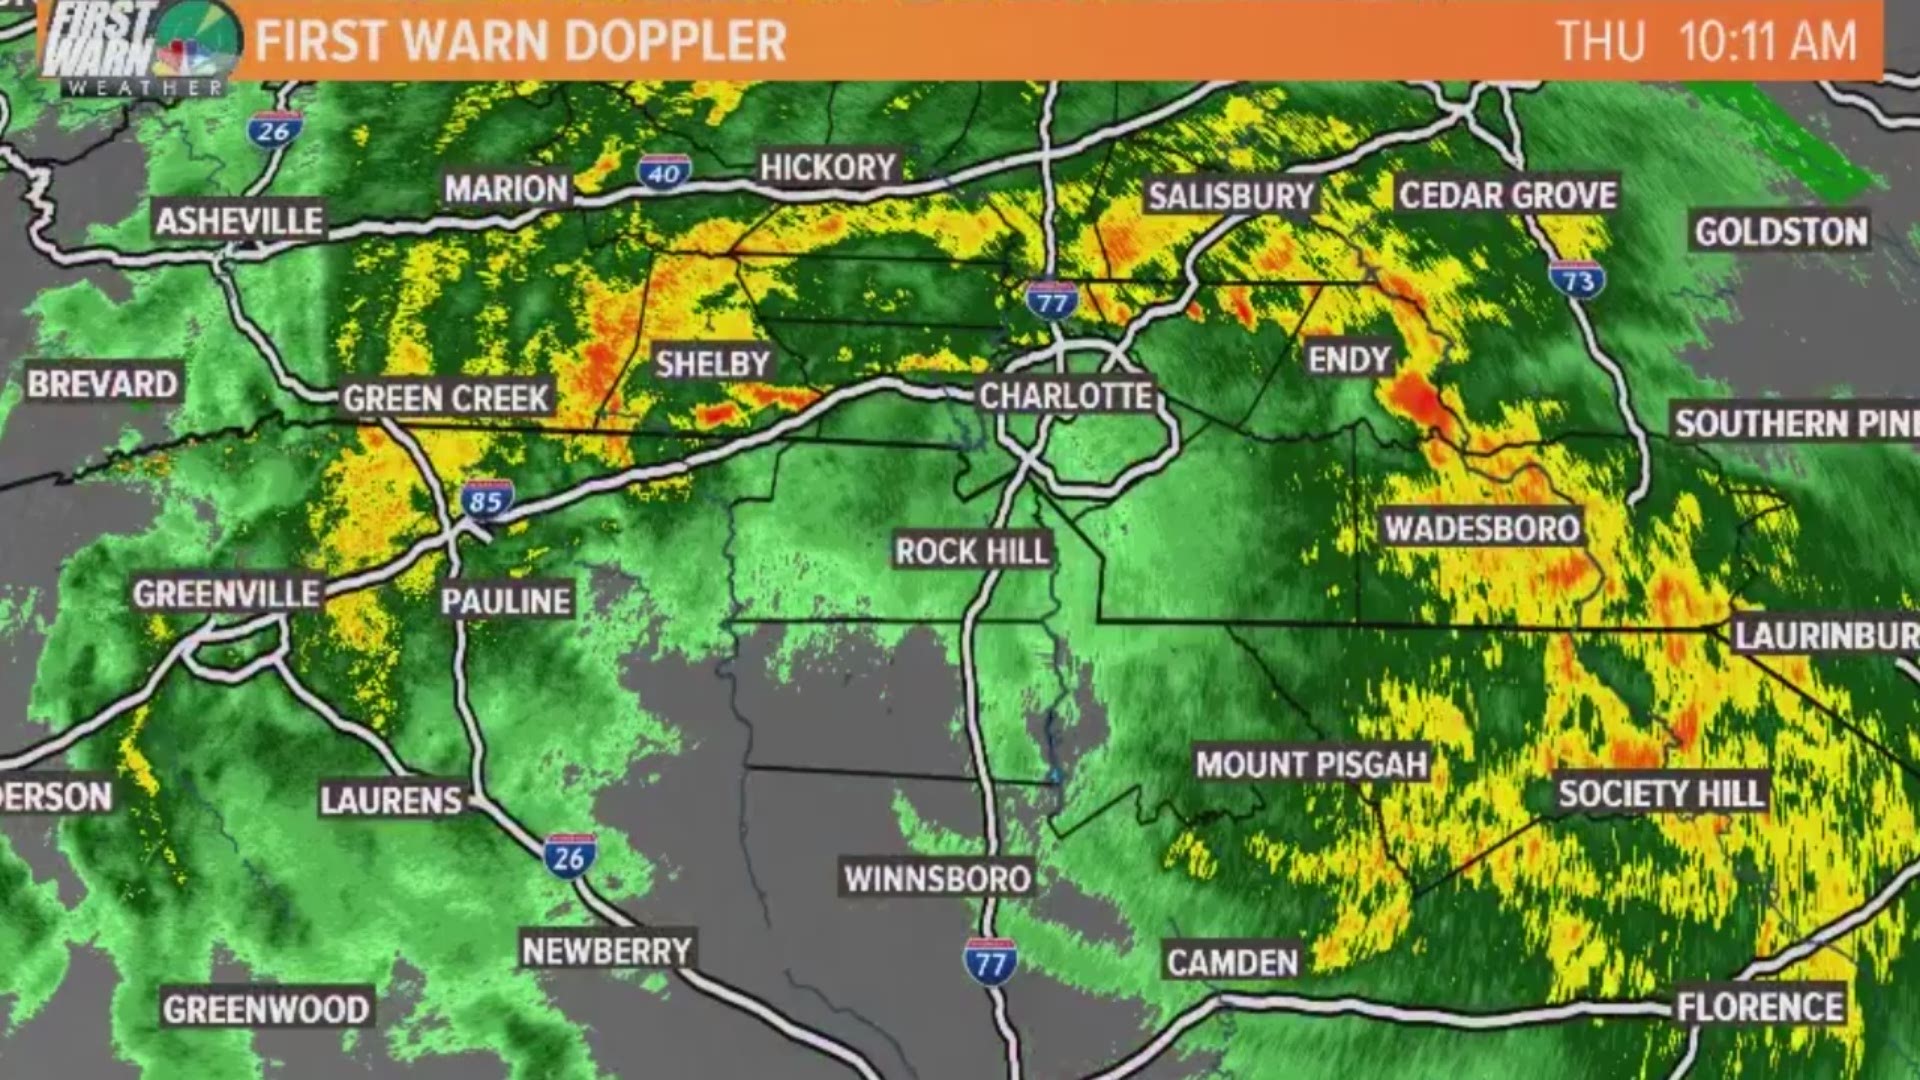 Bands of heavy rain and tropical storm force winds are moving through the Charlotte area. Heavy rain is expected to last through the afternoon before Michael moves out of the region.